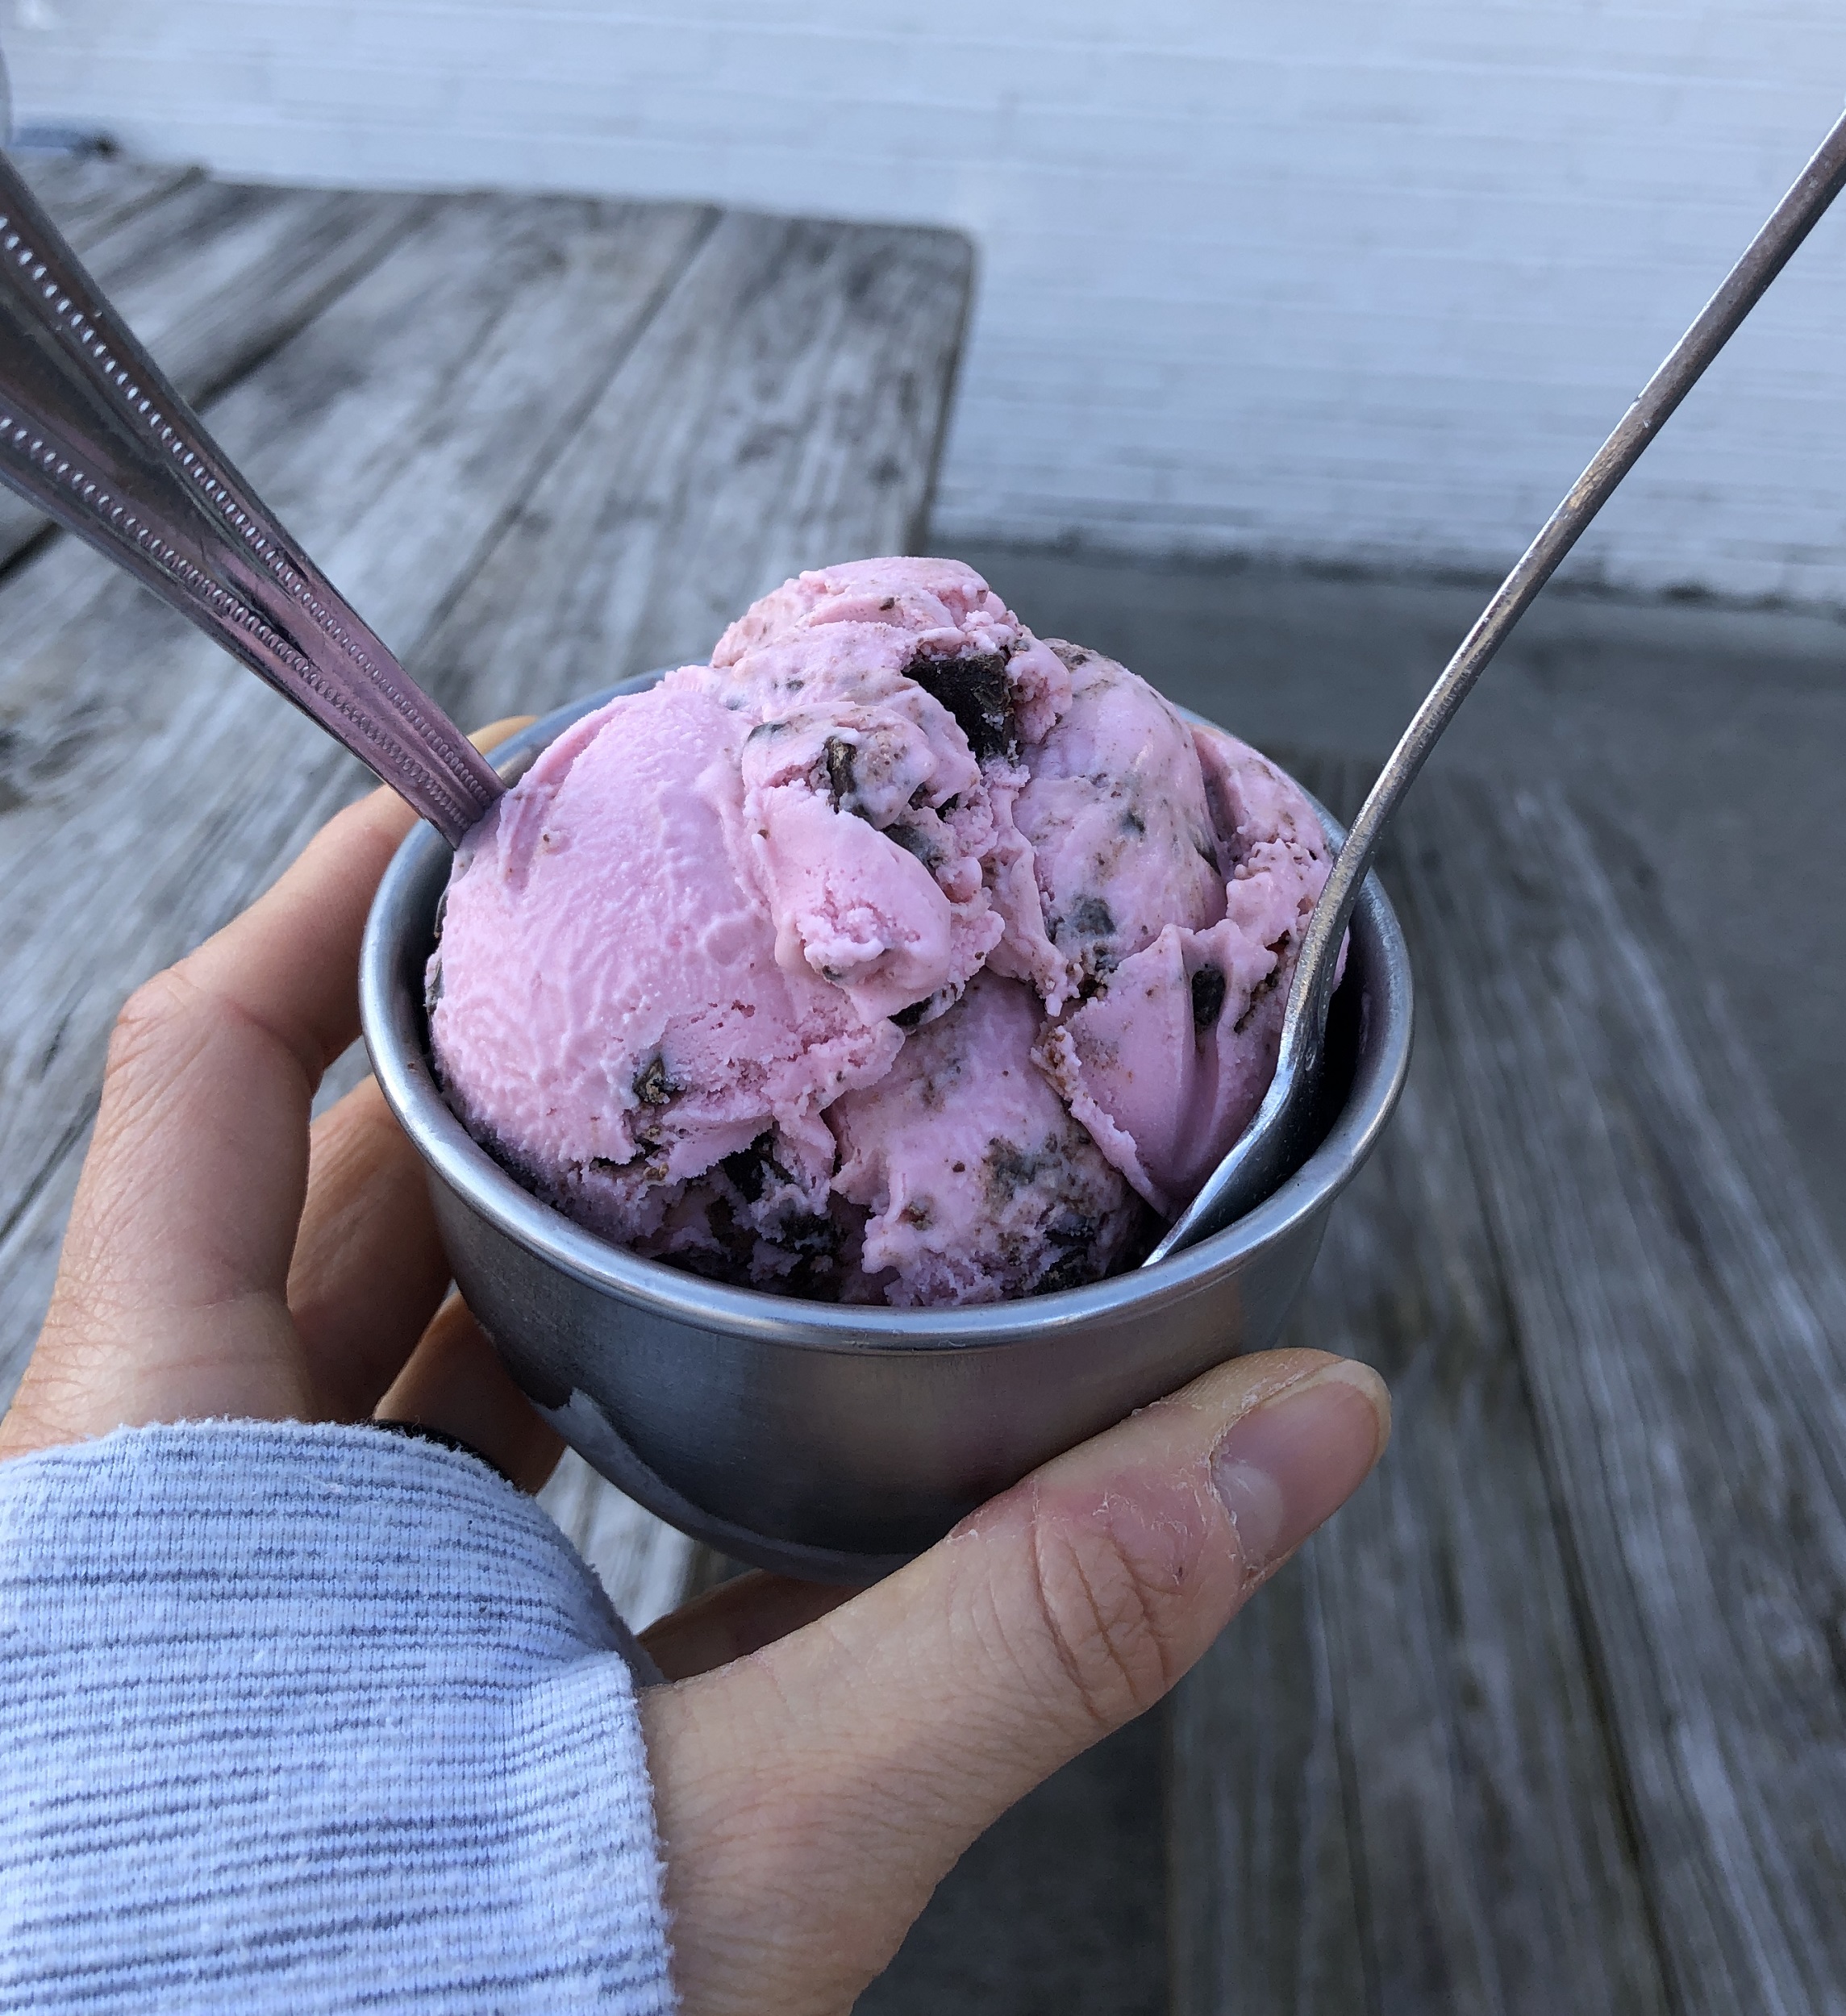 Vegan Strawberry Chocolate Ice Cream at Sidewall Pizza in Greenville